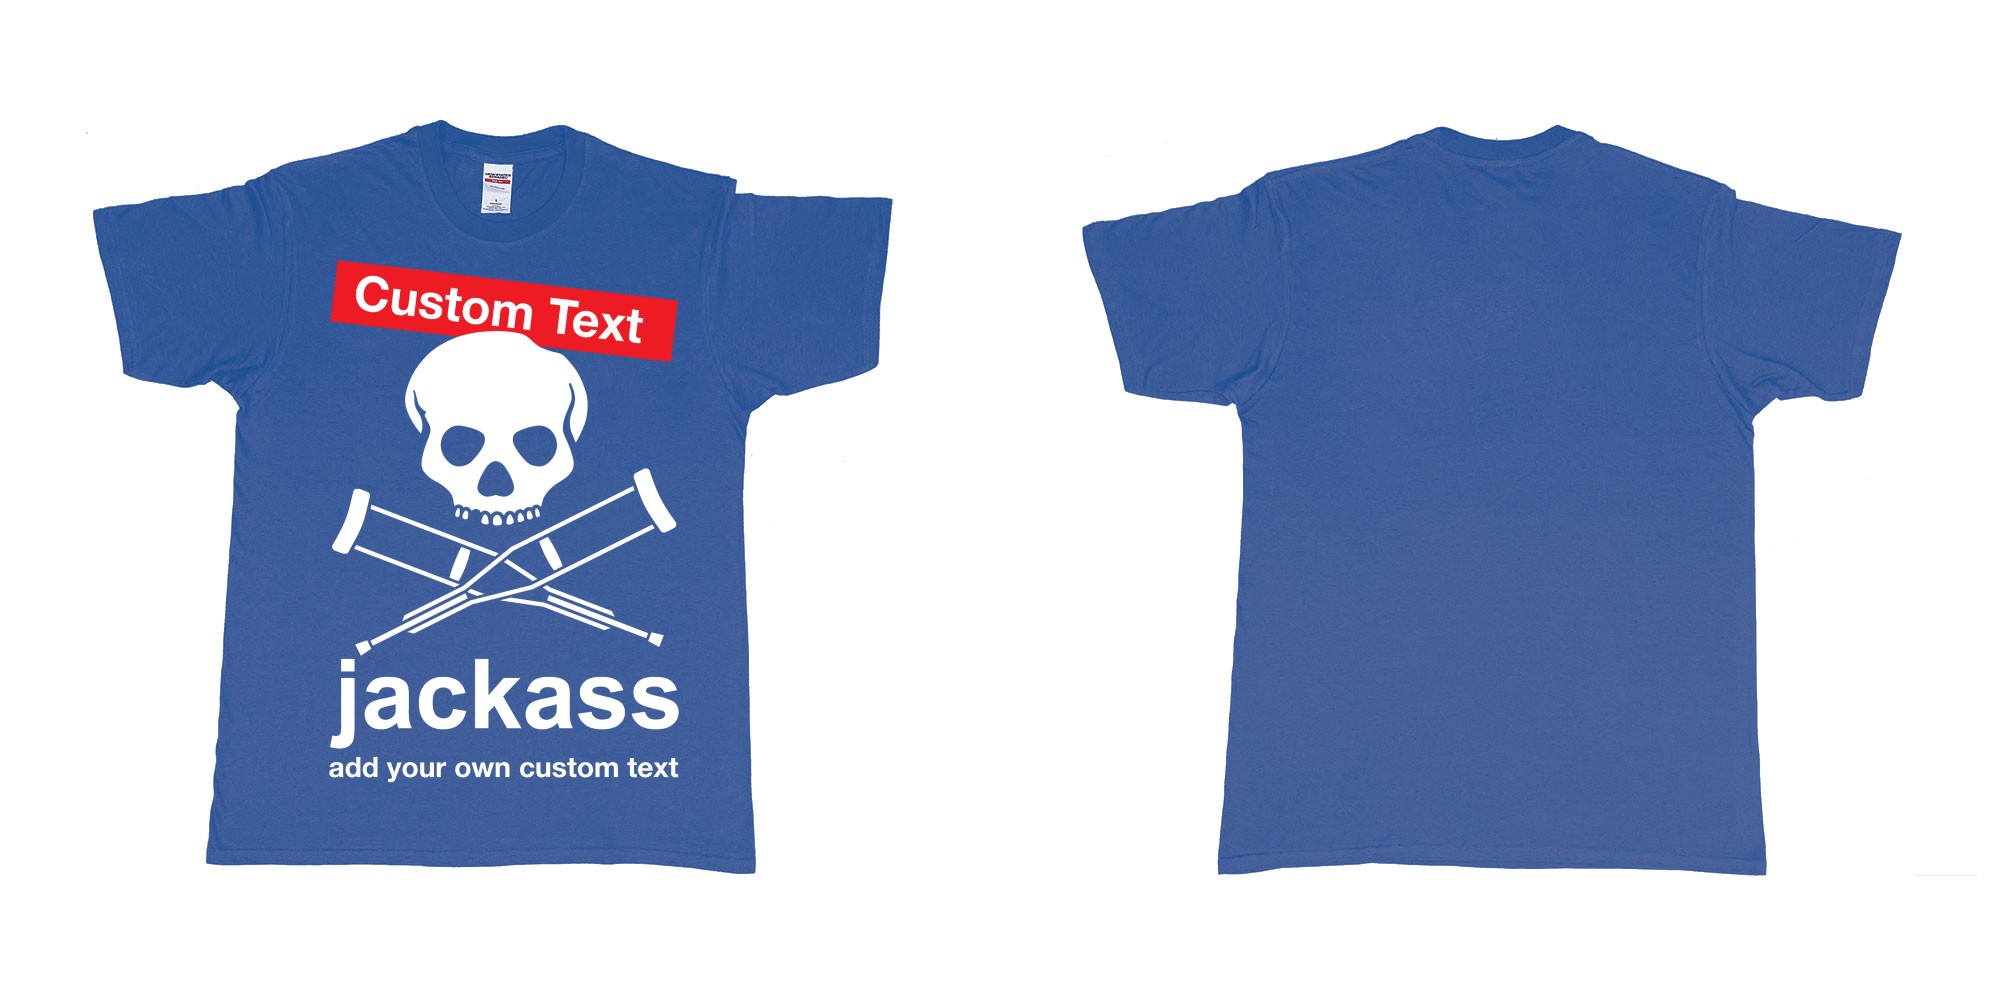 Custom tshirt design jackass skull and crutches own custom print in fabric color royal-blue choice your own text made in Bali by The Pirate Way